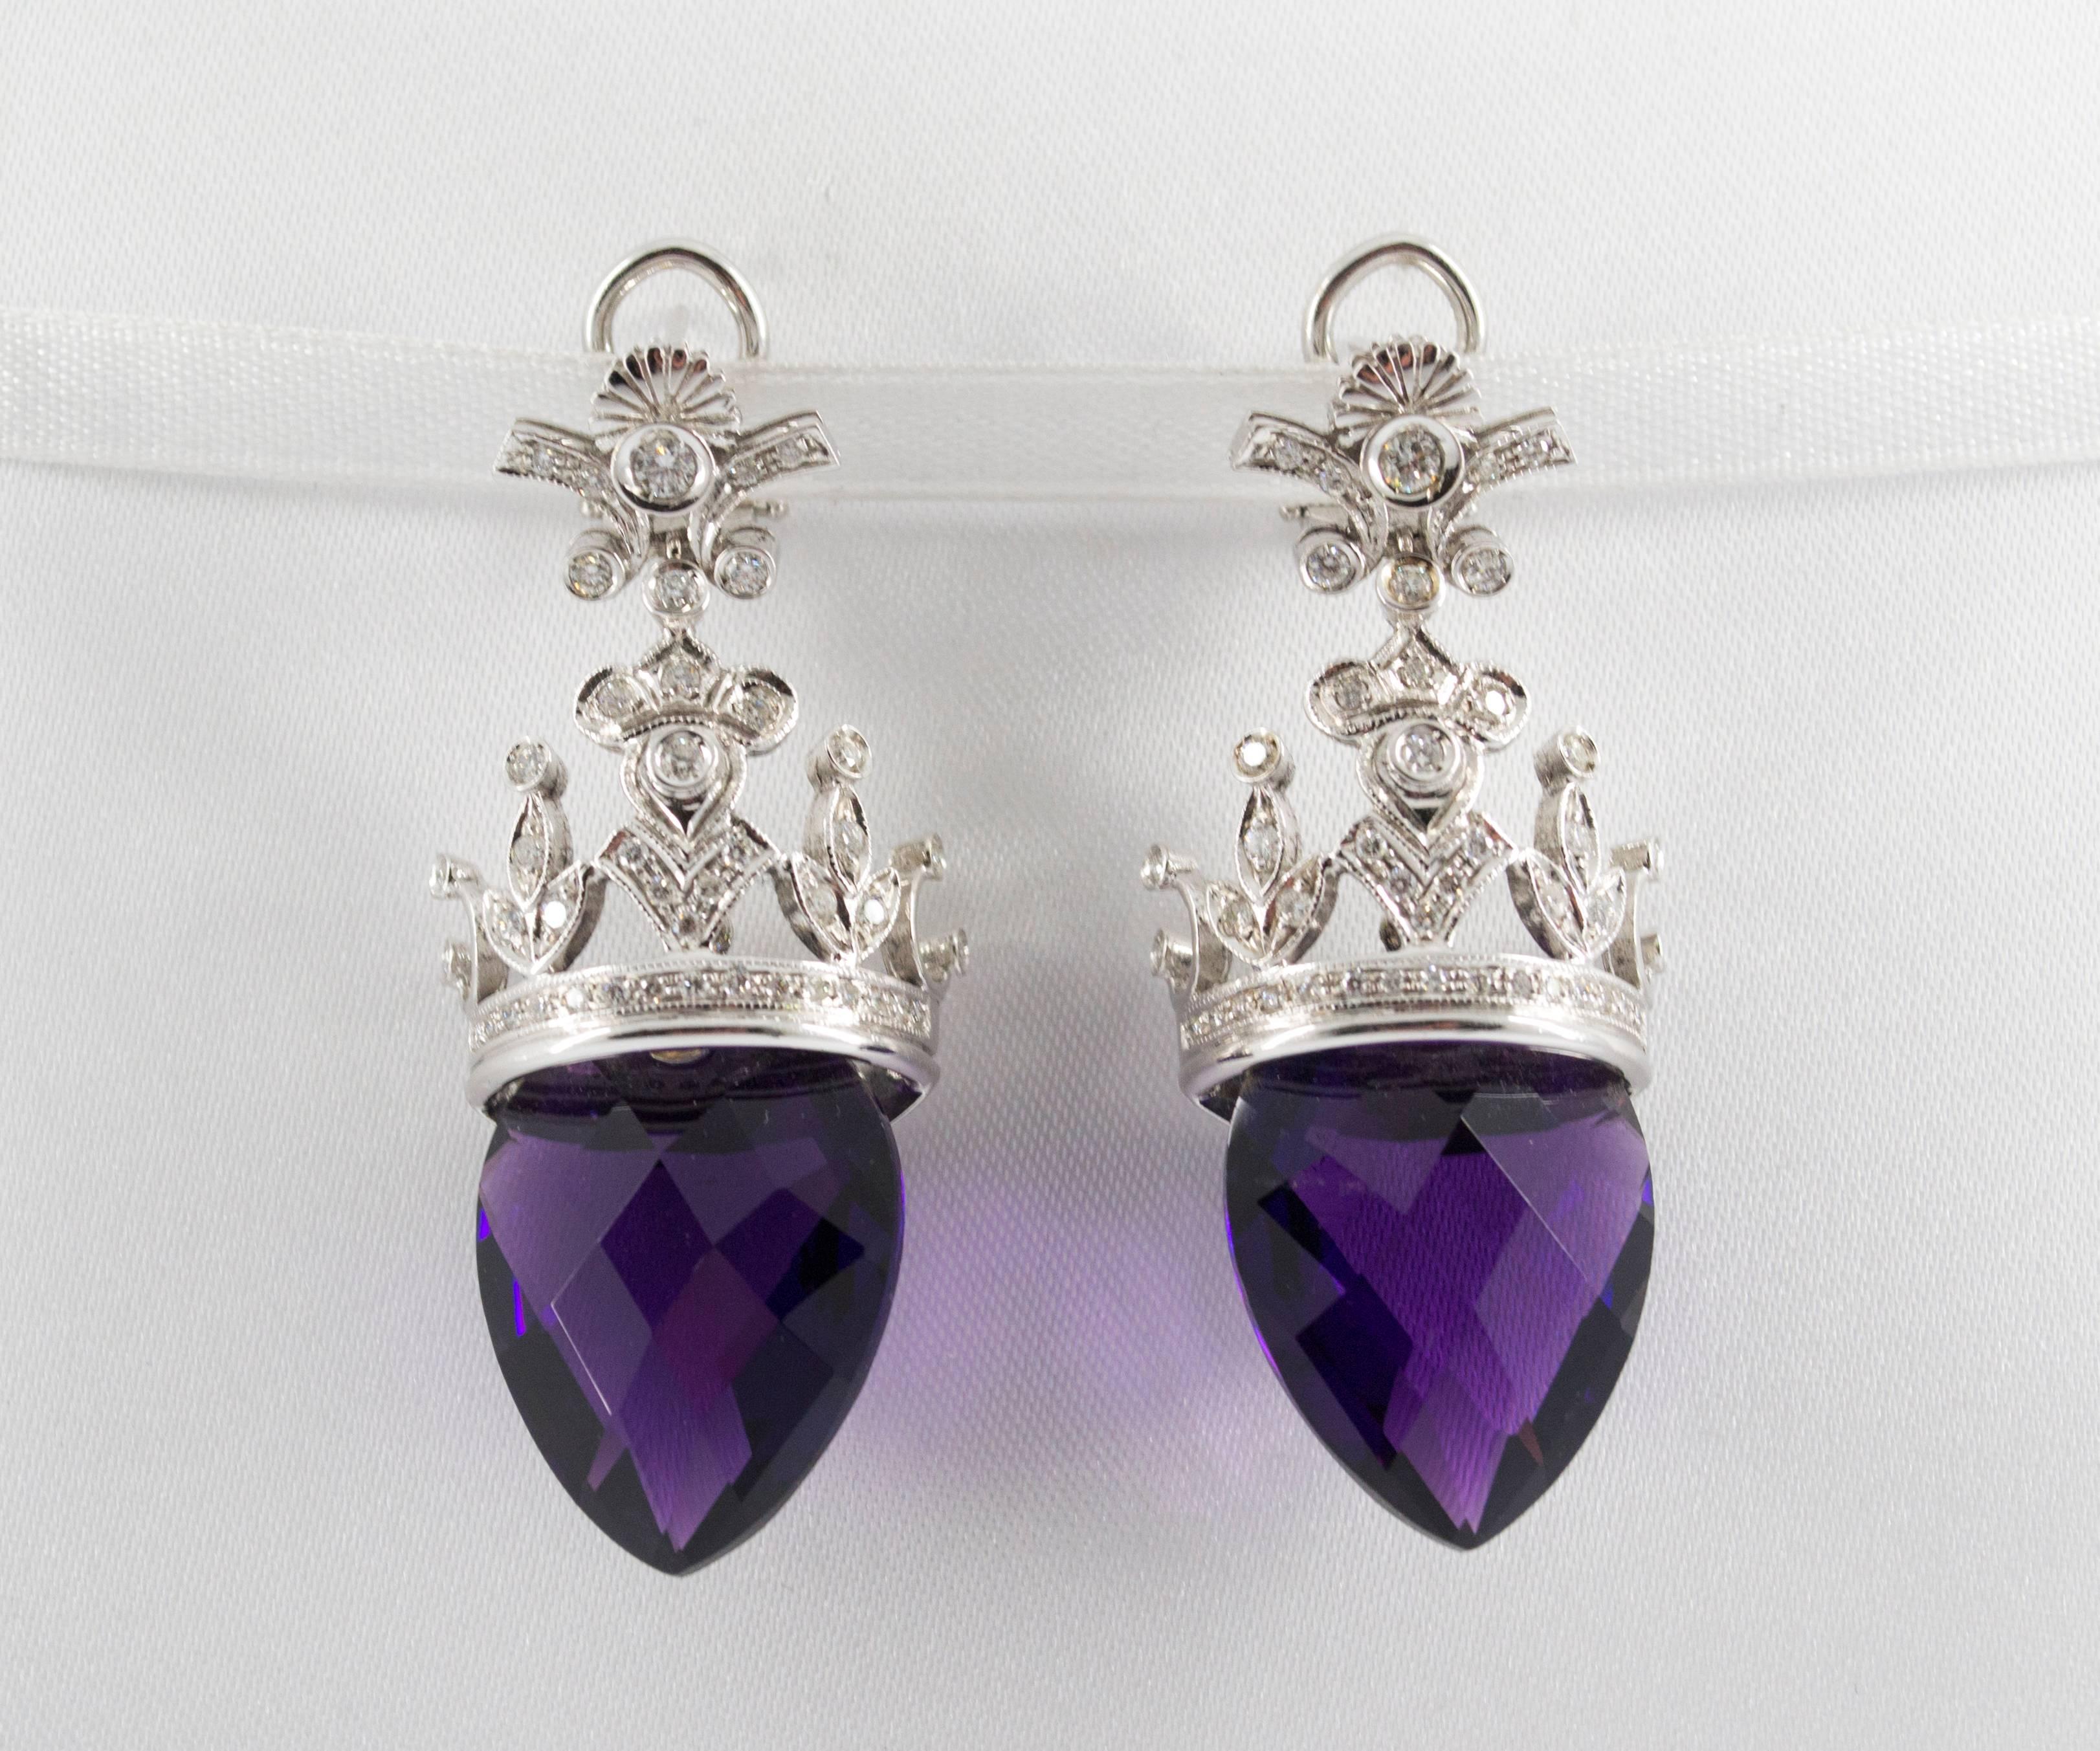 This Earrings are made of 18K White Gold.
This Earrings have two big Amethysts.
This Earrings have 1.20 Carats of White Diamonds.
All our Earrings have pins for pierced ears but we can change the closure and make any of our Earrings suitable even